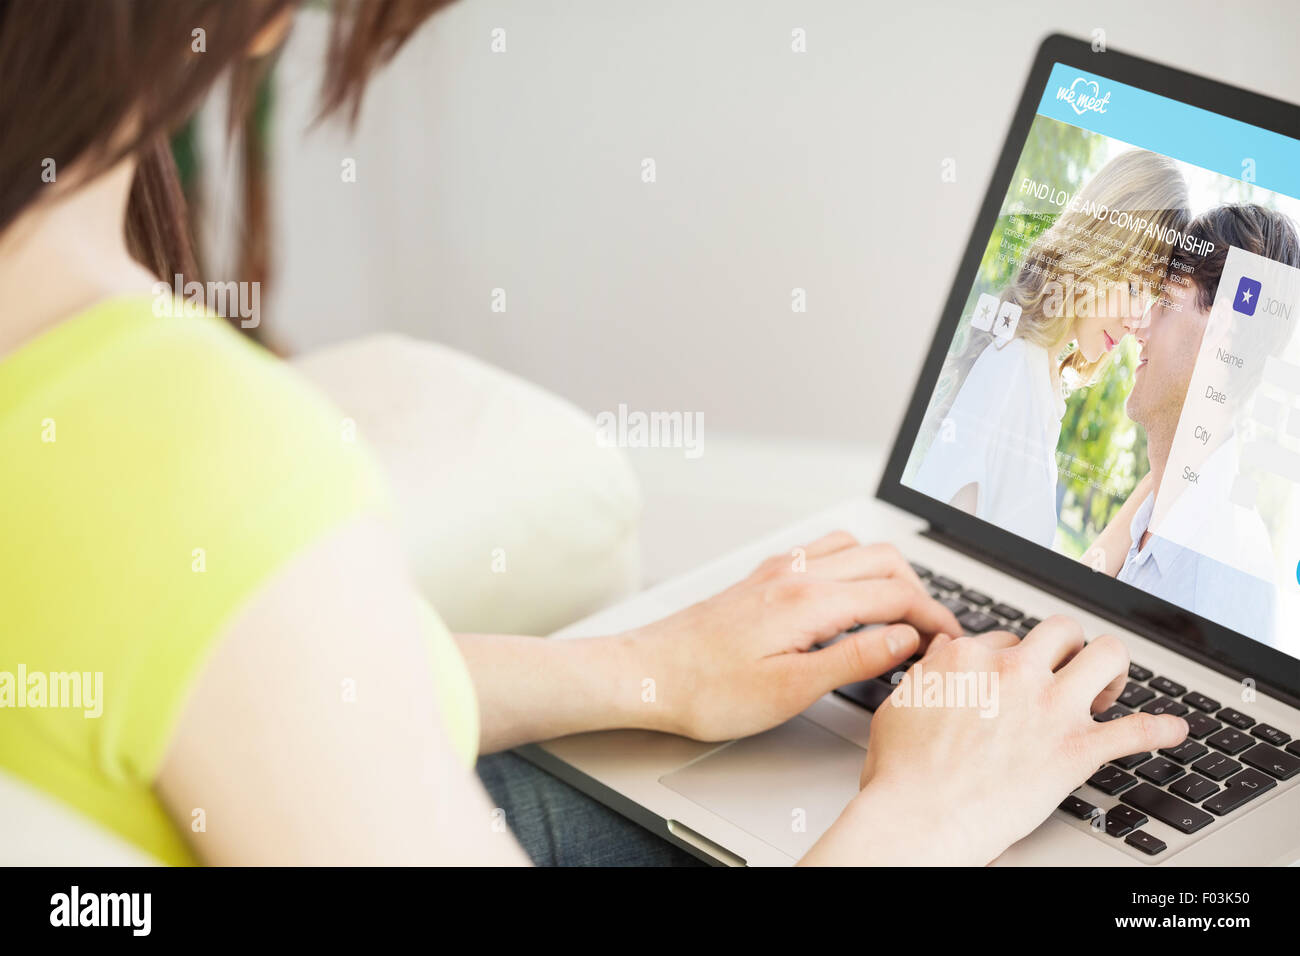 Composite image of dating website Stock Photo